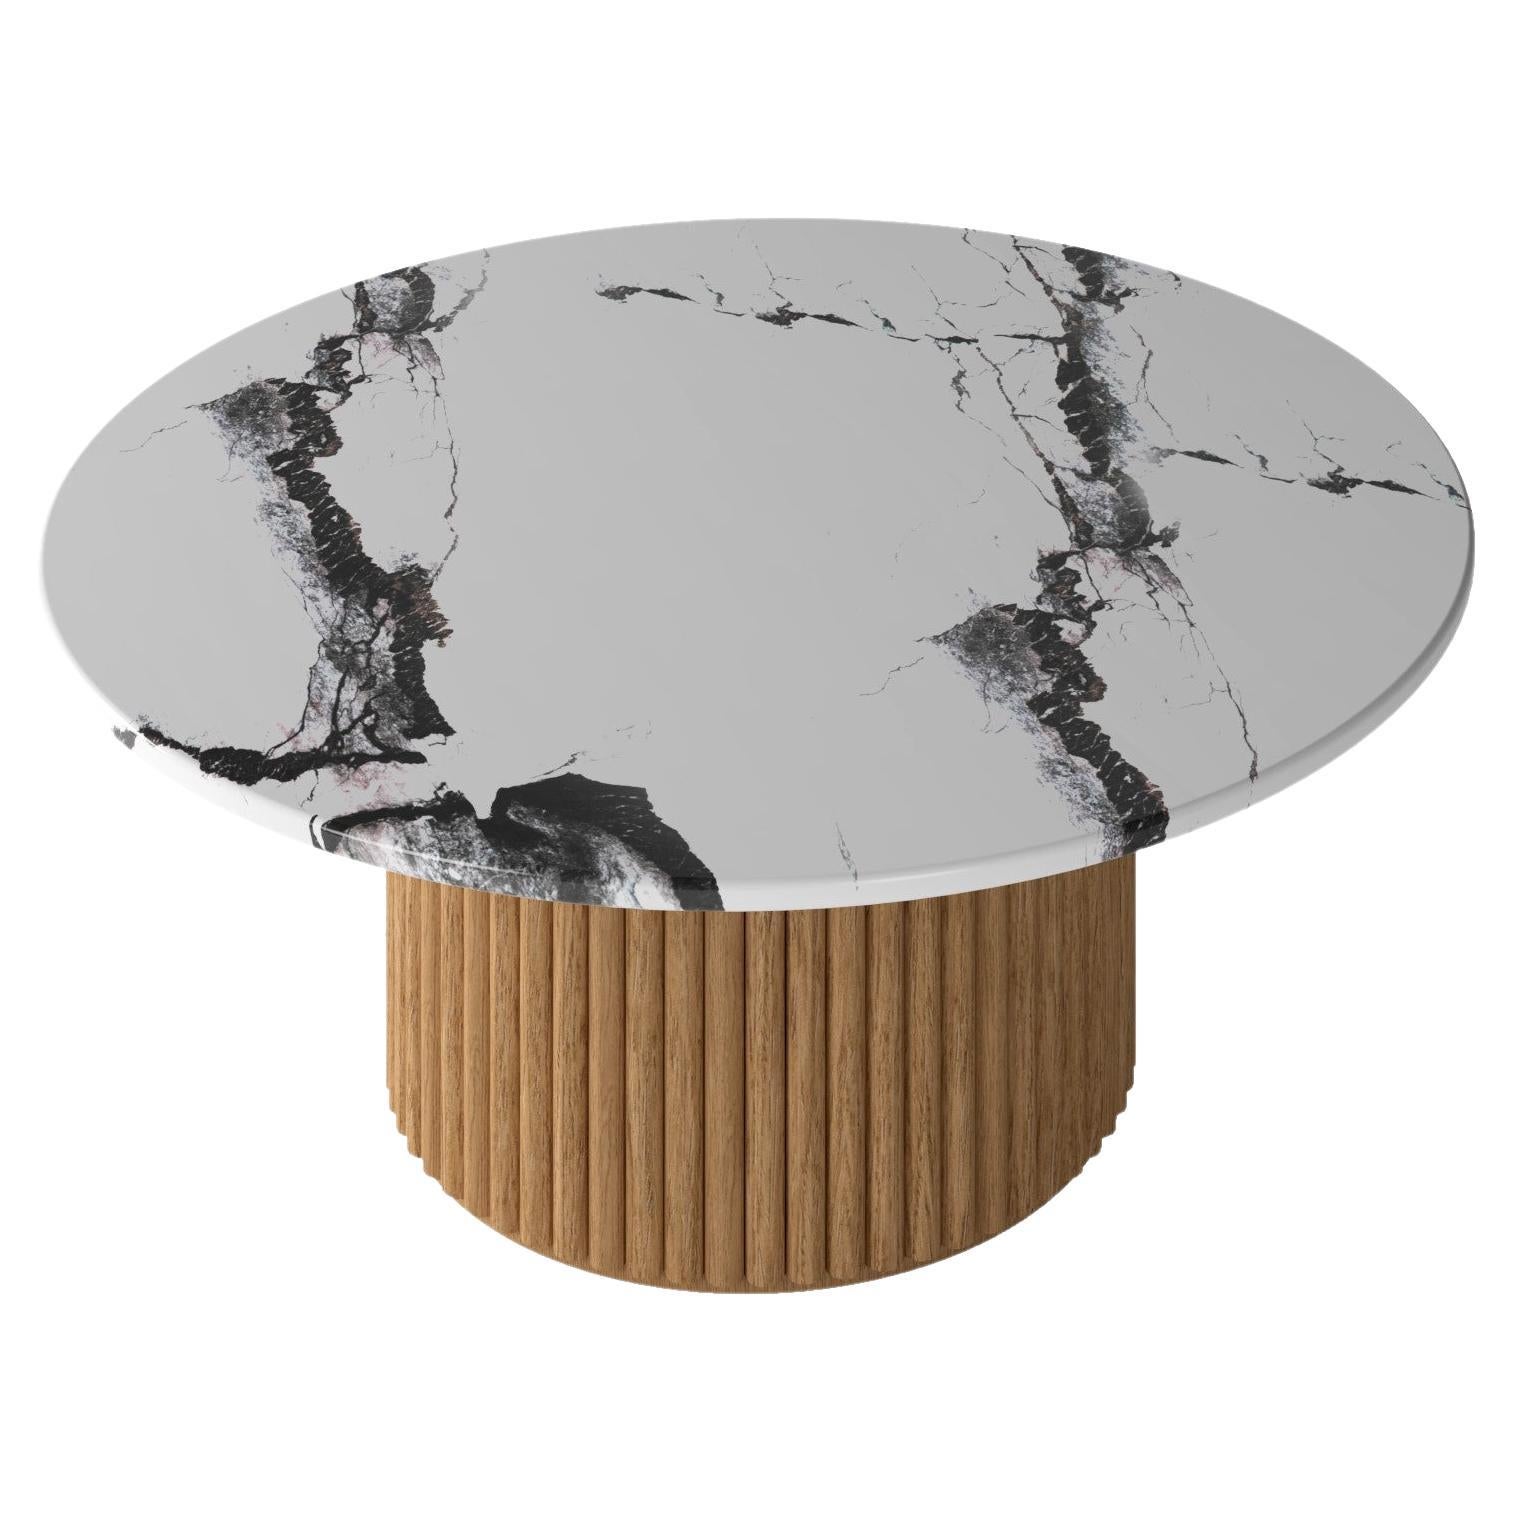 NORDST Mette Coffee Table, Italian White Mountain Marble, Danish Modern Design  For Sale